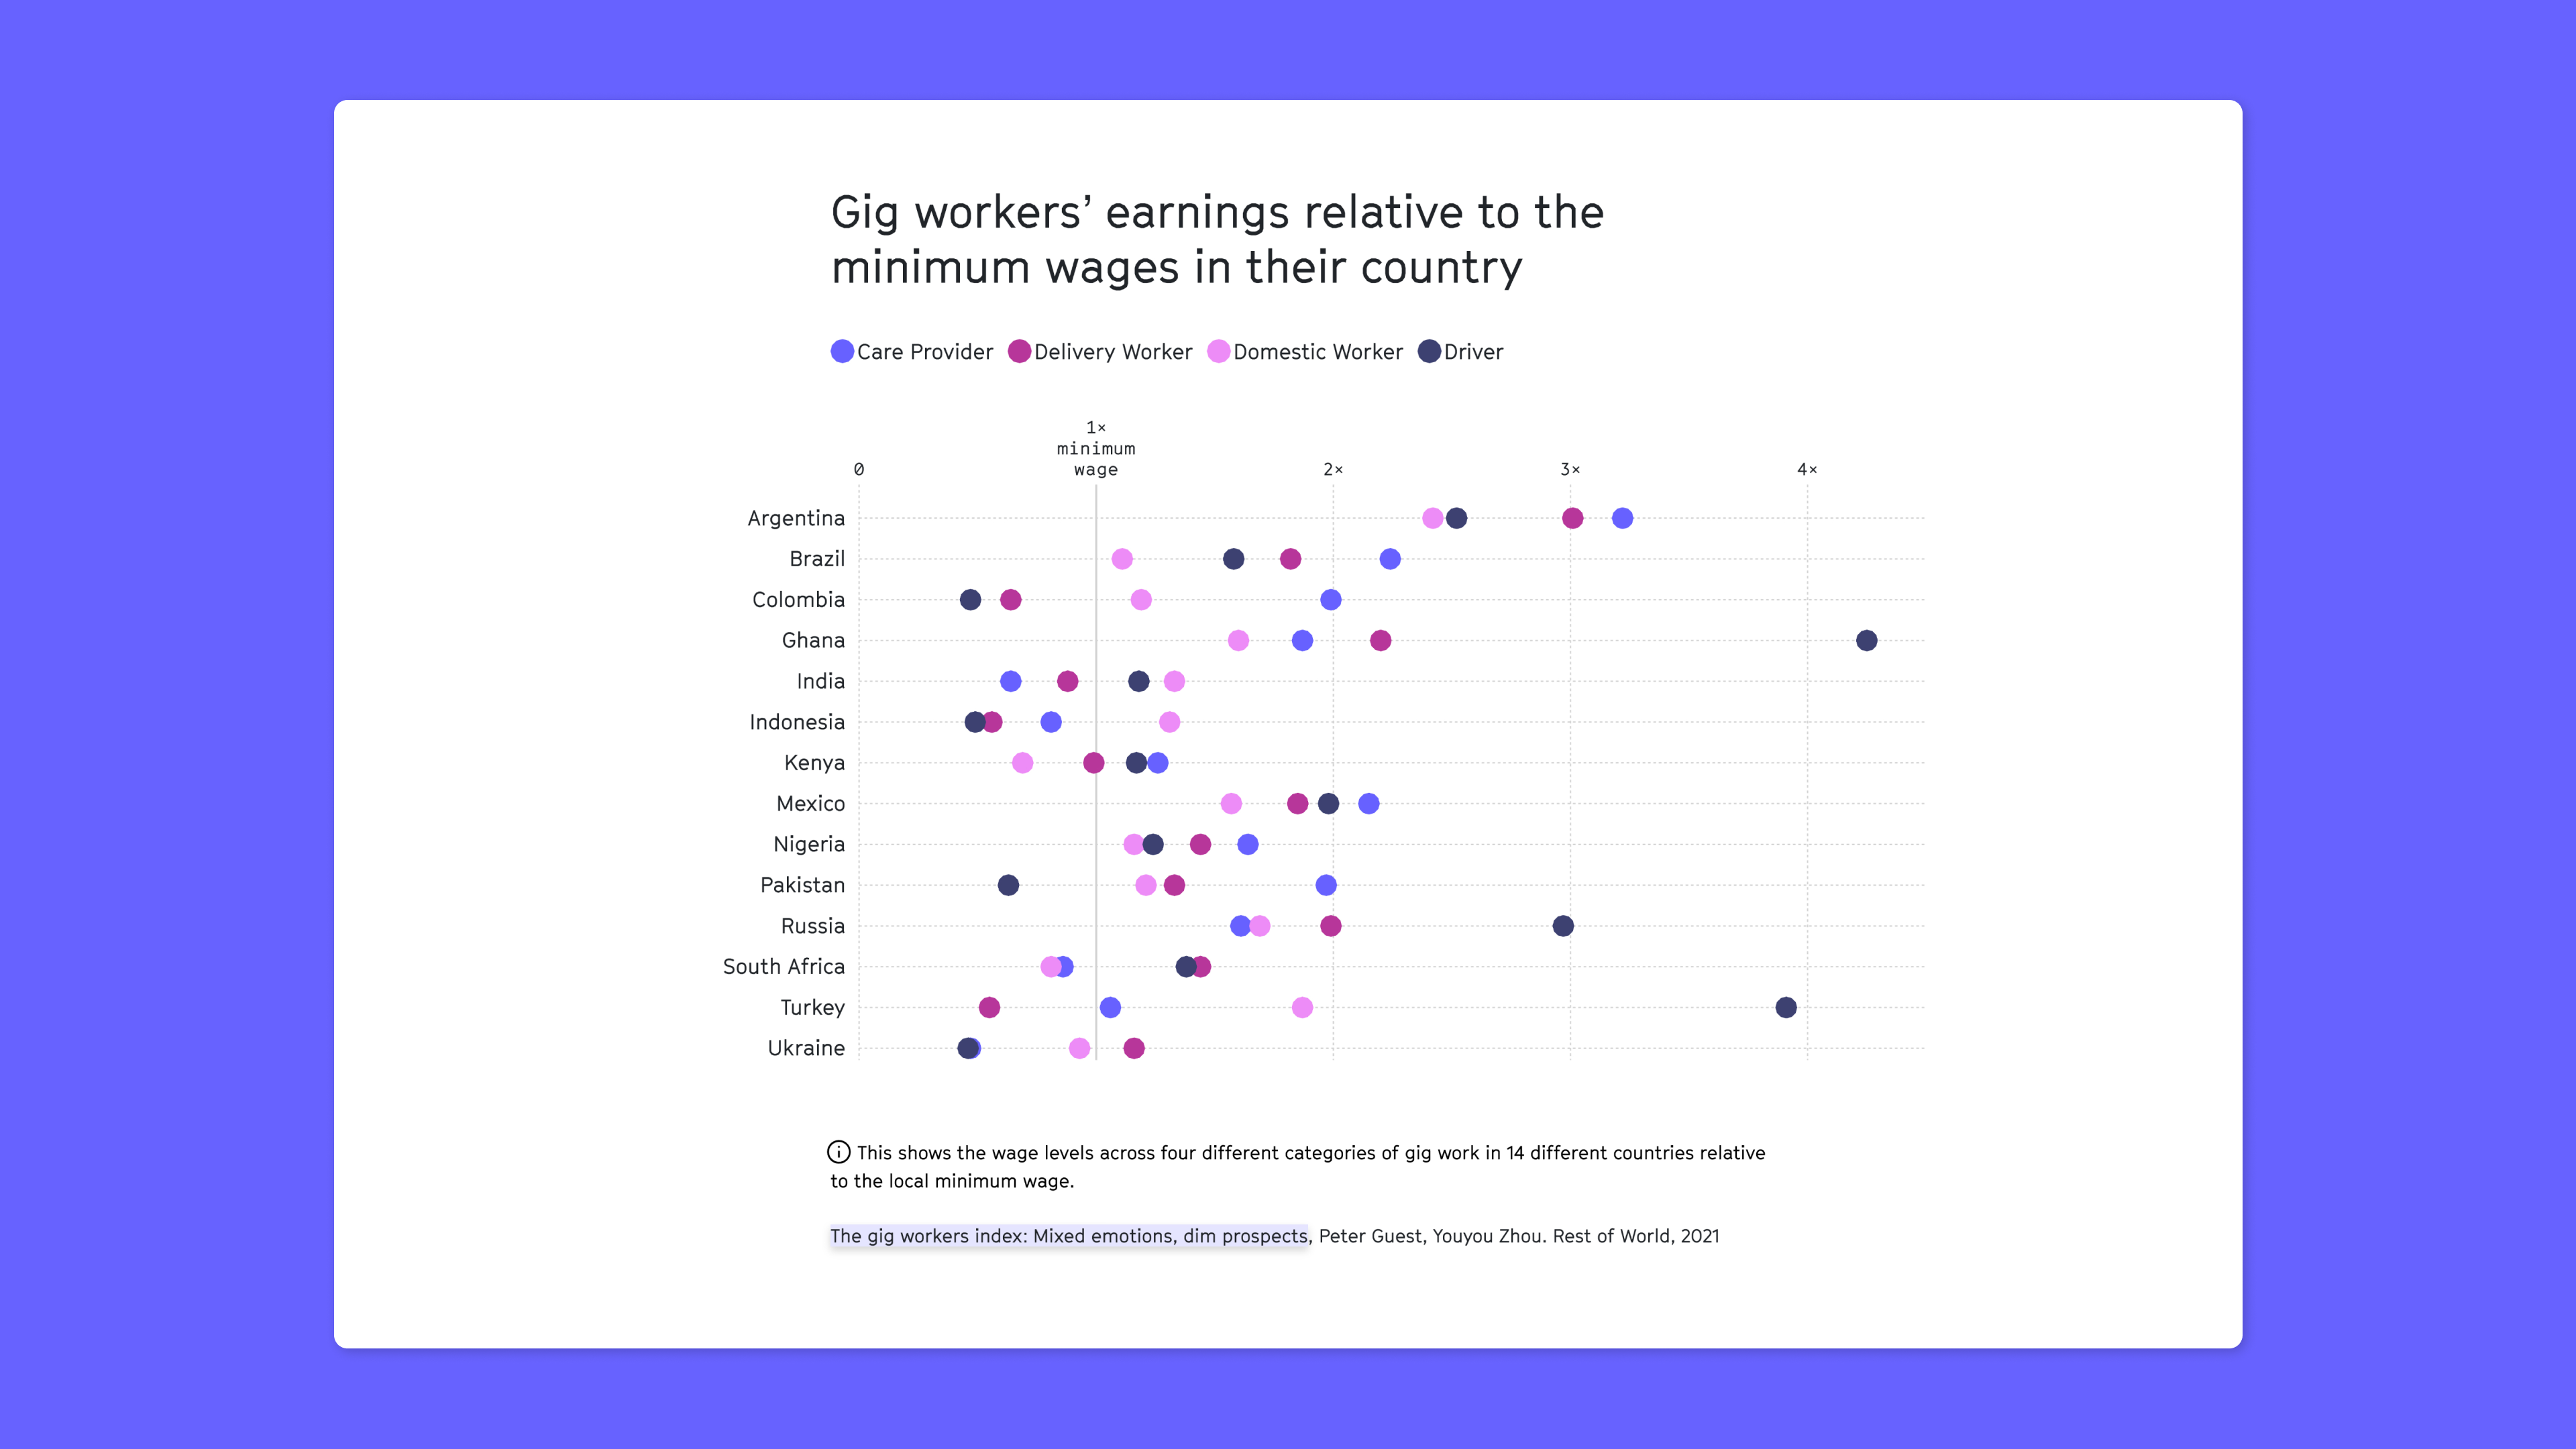 A graphic showing the salary of gig workers in different parts of the world, relative to their country's minimum wage.